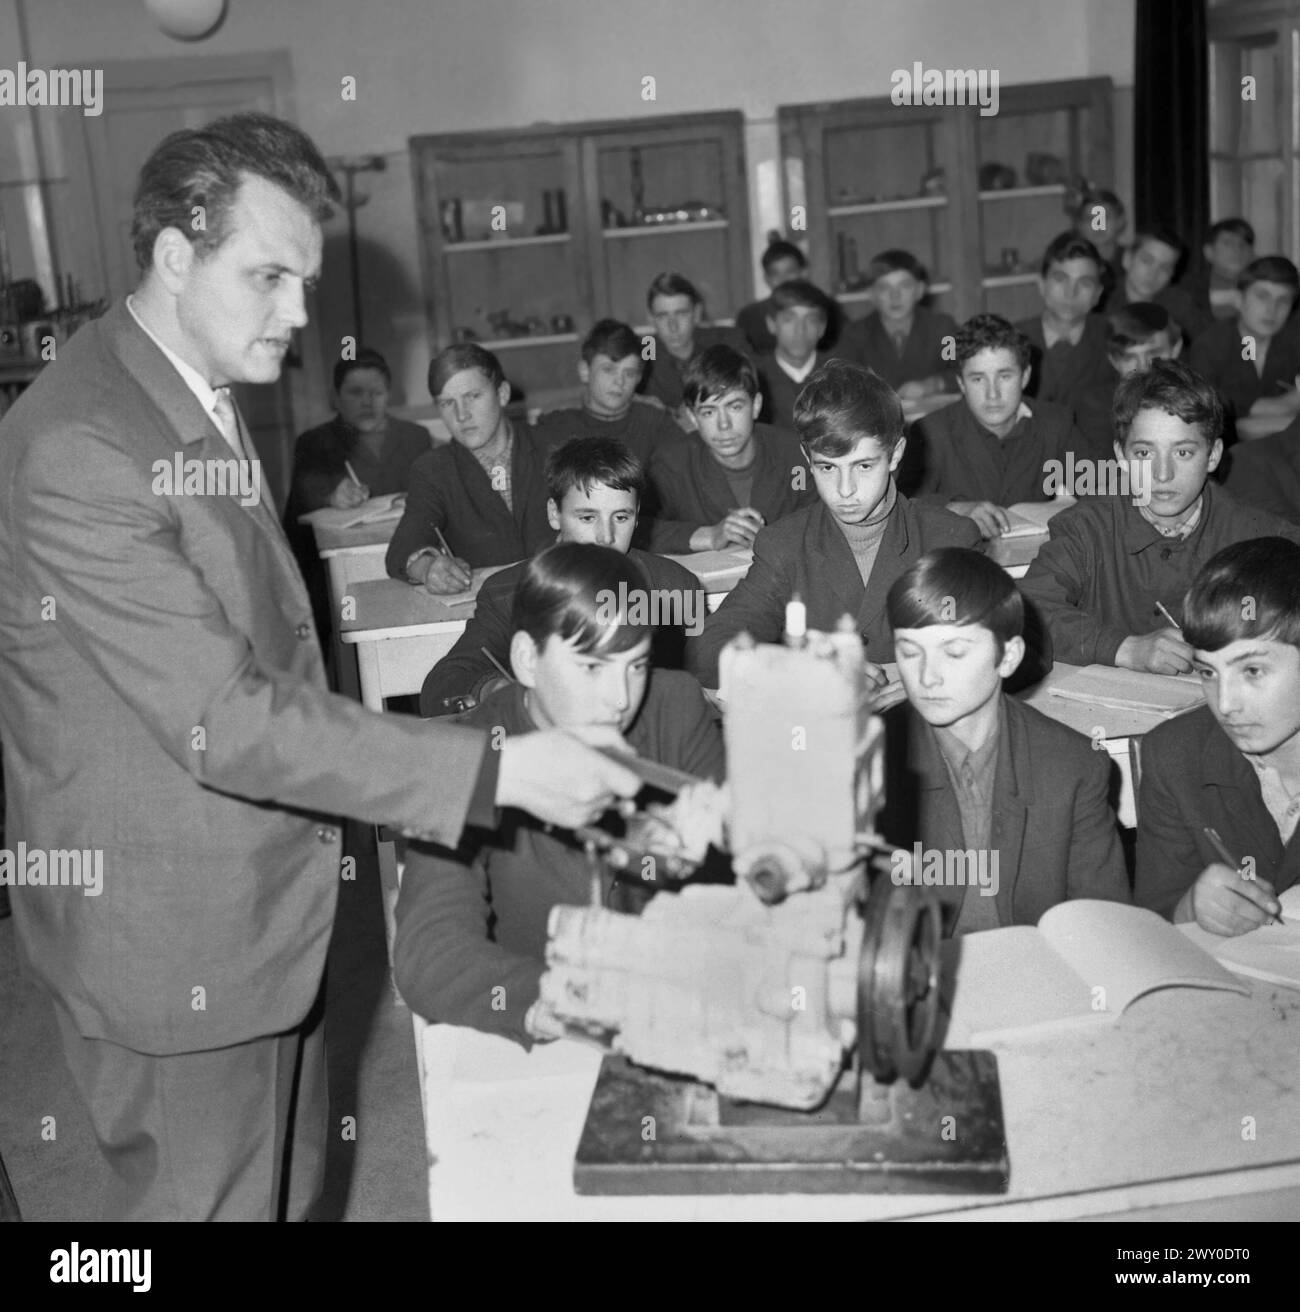 Socialist Republic of Romania in the 1970s. Class of middle-aged boys in a governmental vocational school. Stock Photo